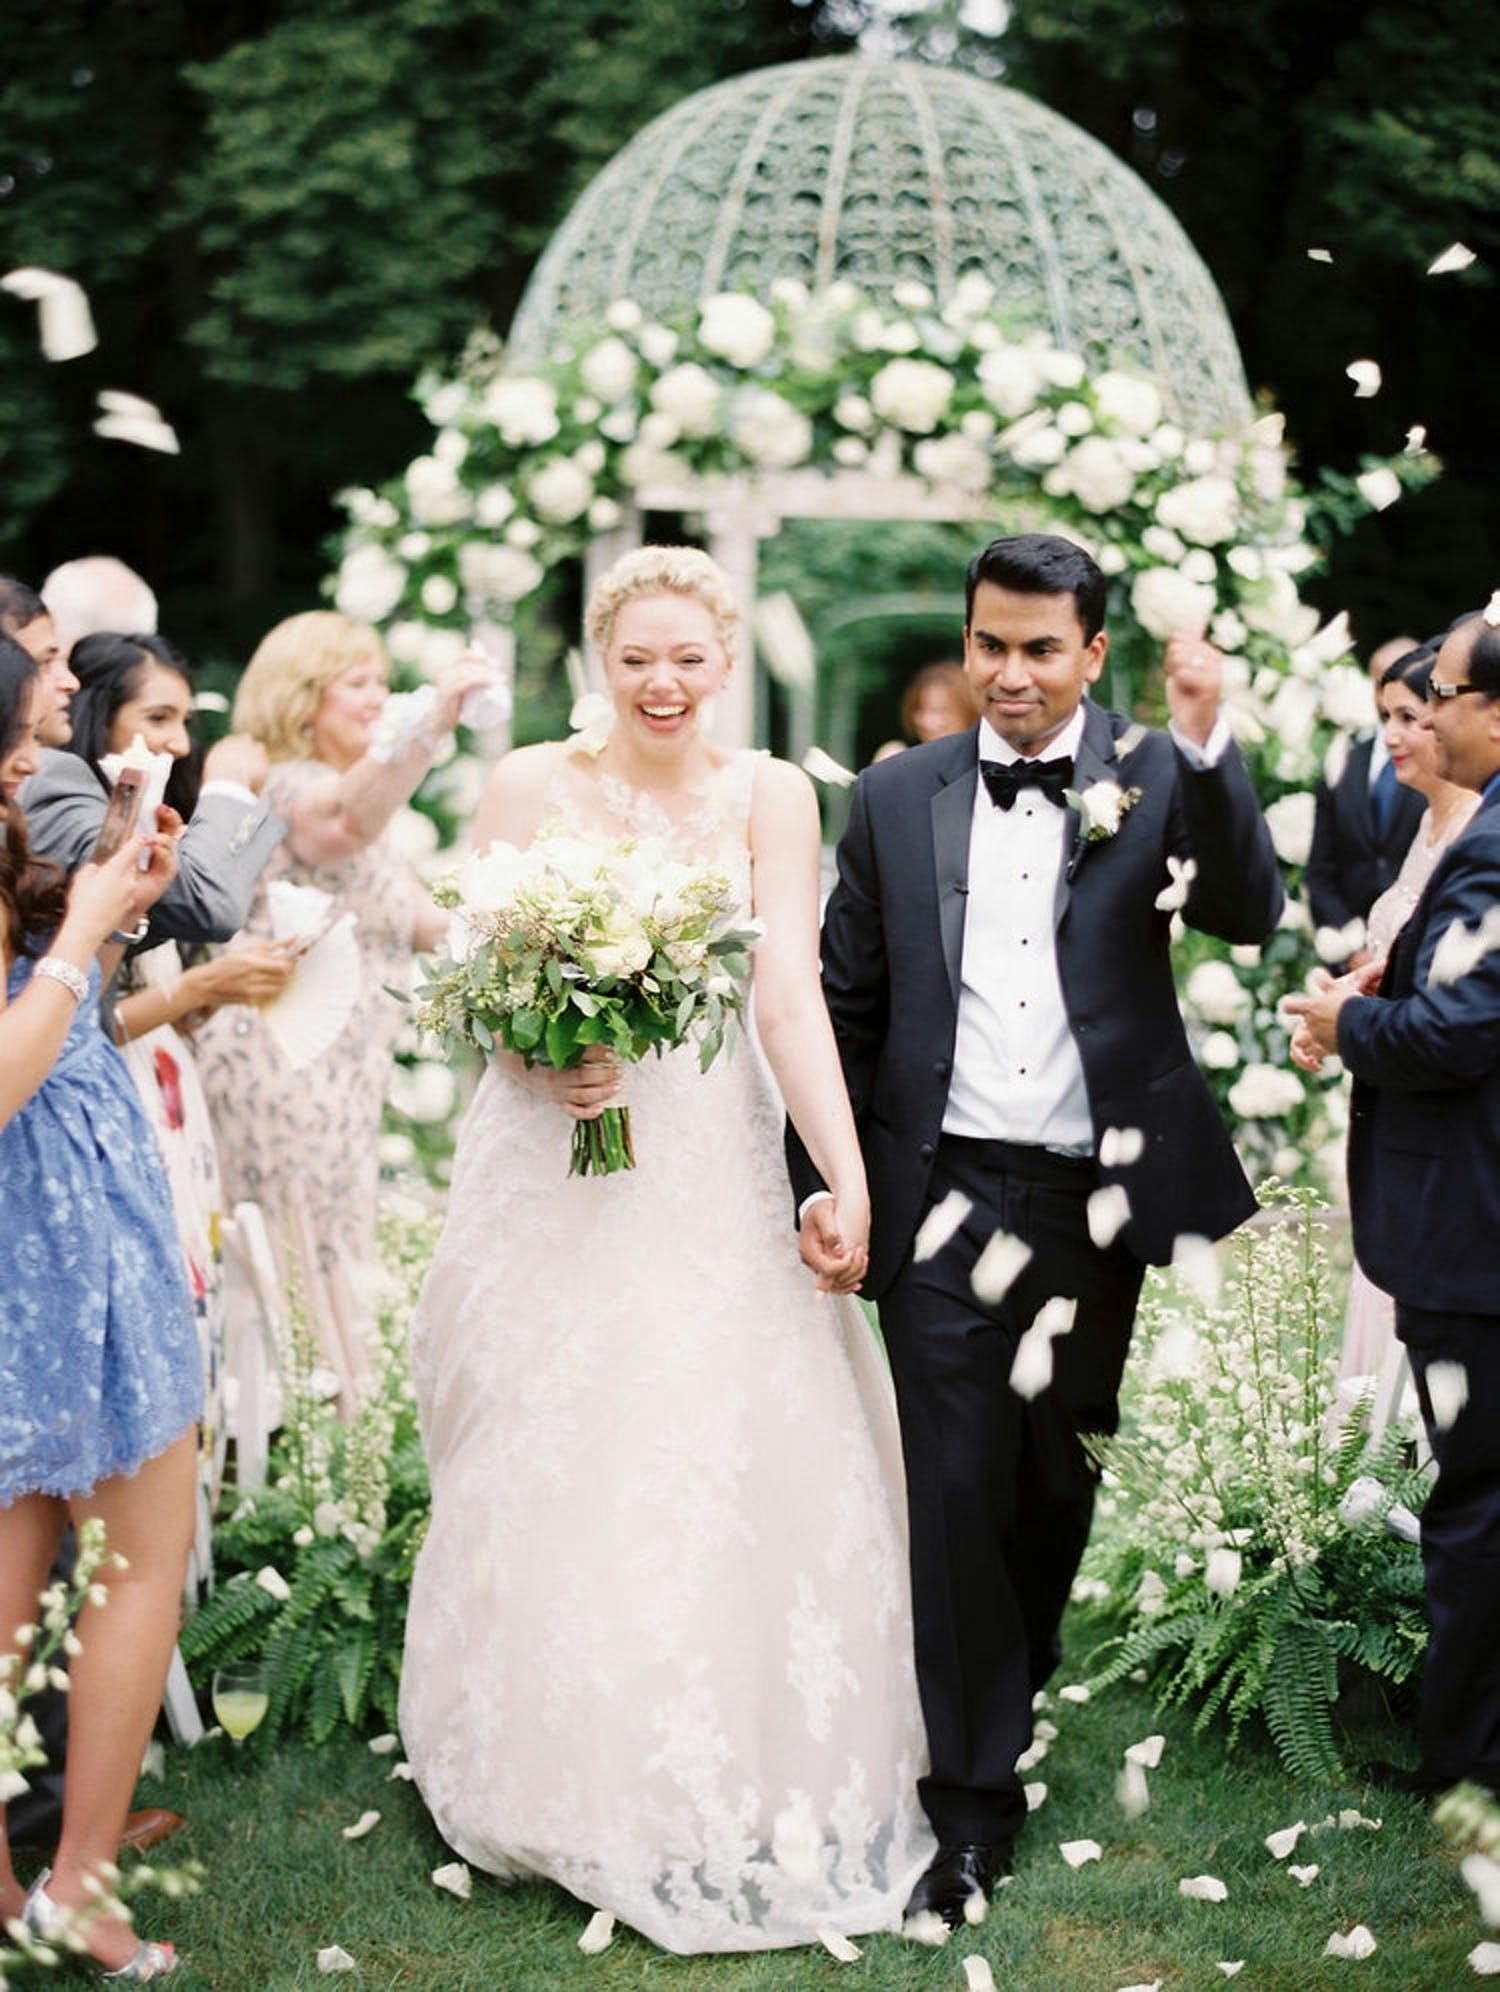 Recessional walk at outdoor wedding with white gazebo covered in white flowers | PartySlate